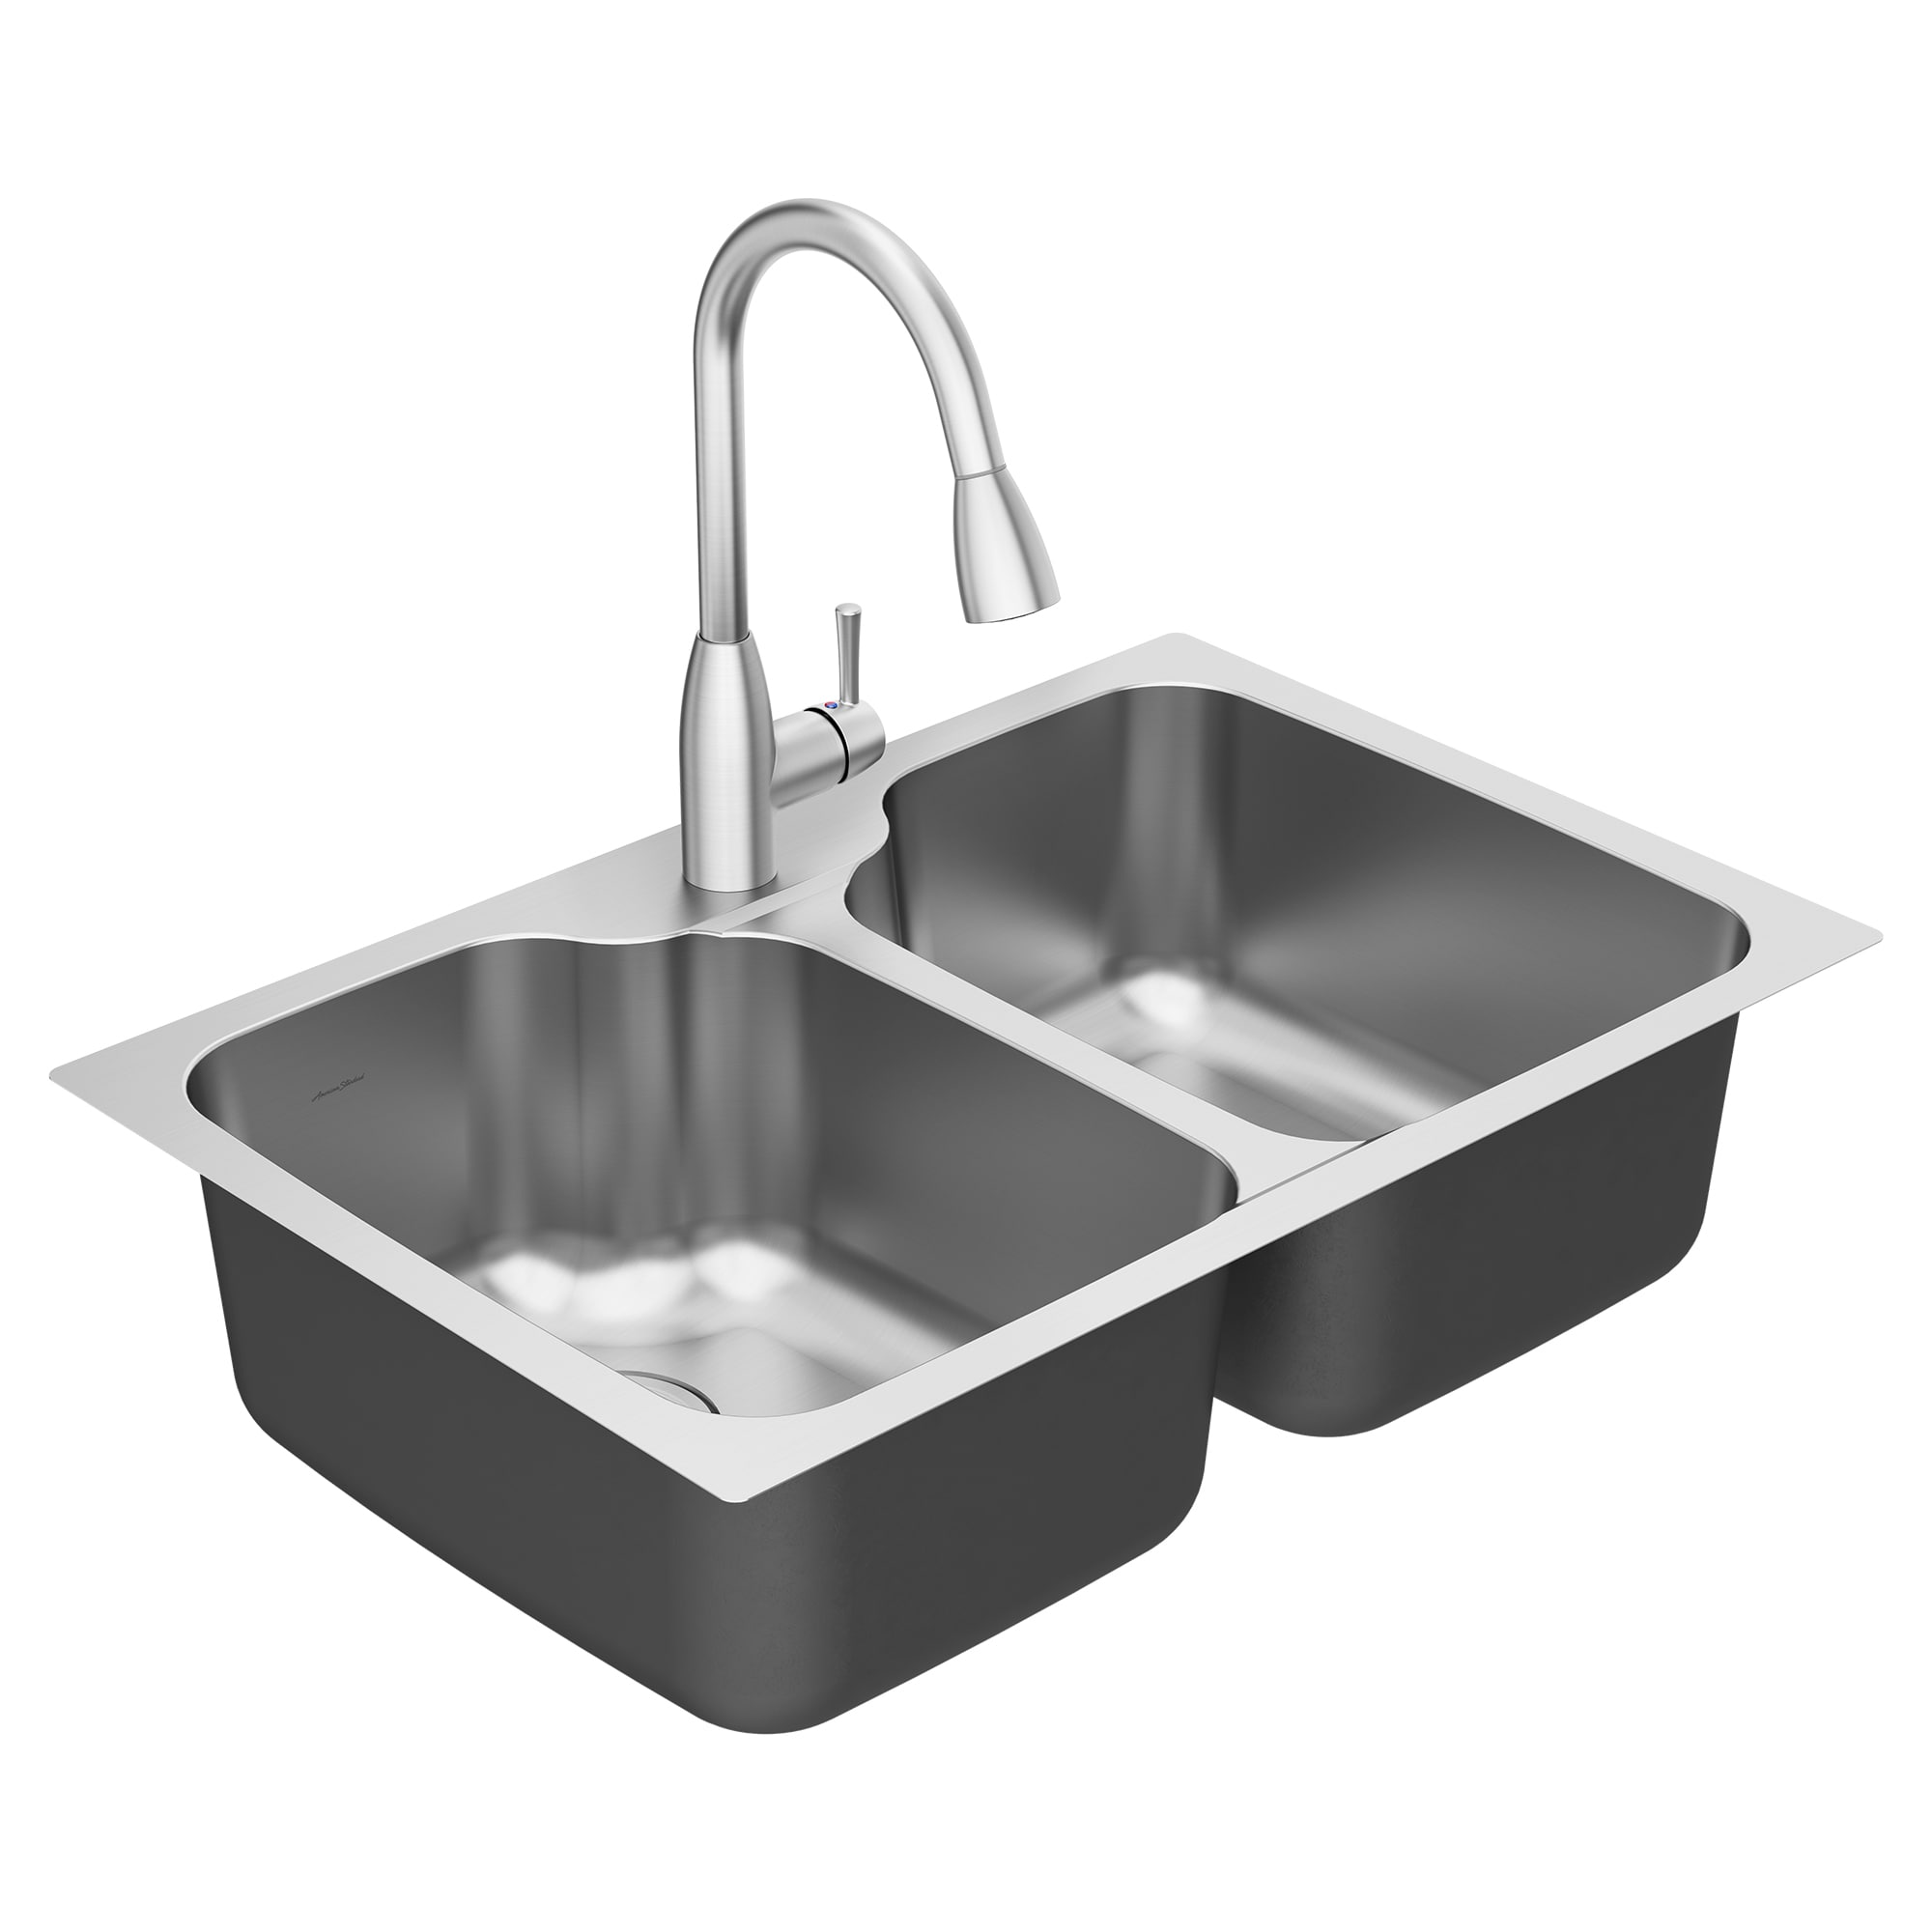 Raviv® Pull-Down Faucet and 33-Inch Stainless Steel Double-Bowl Kitchen  Sink Kit